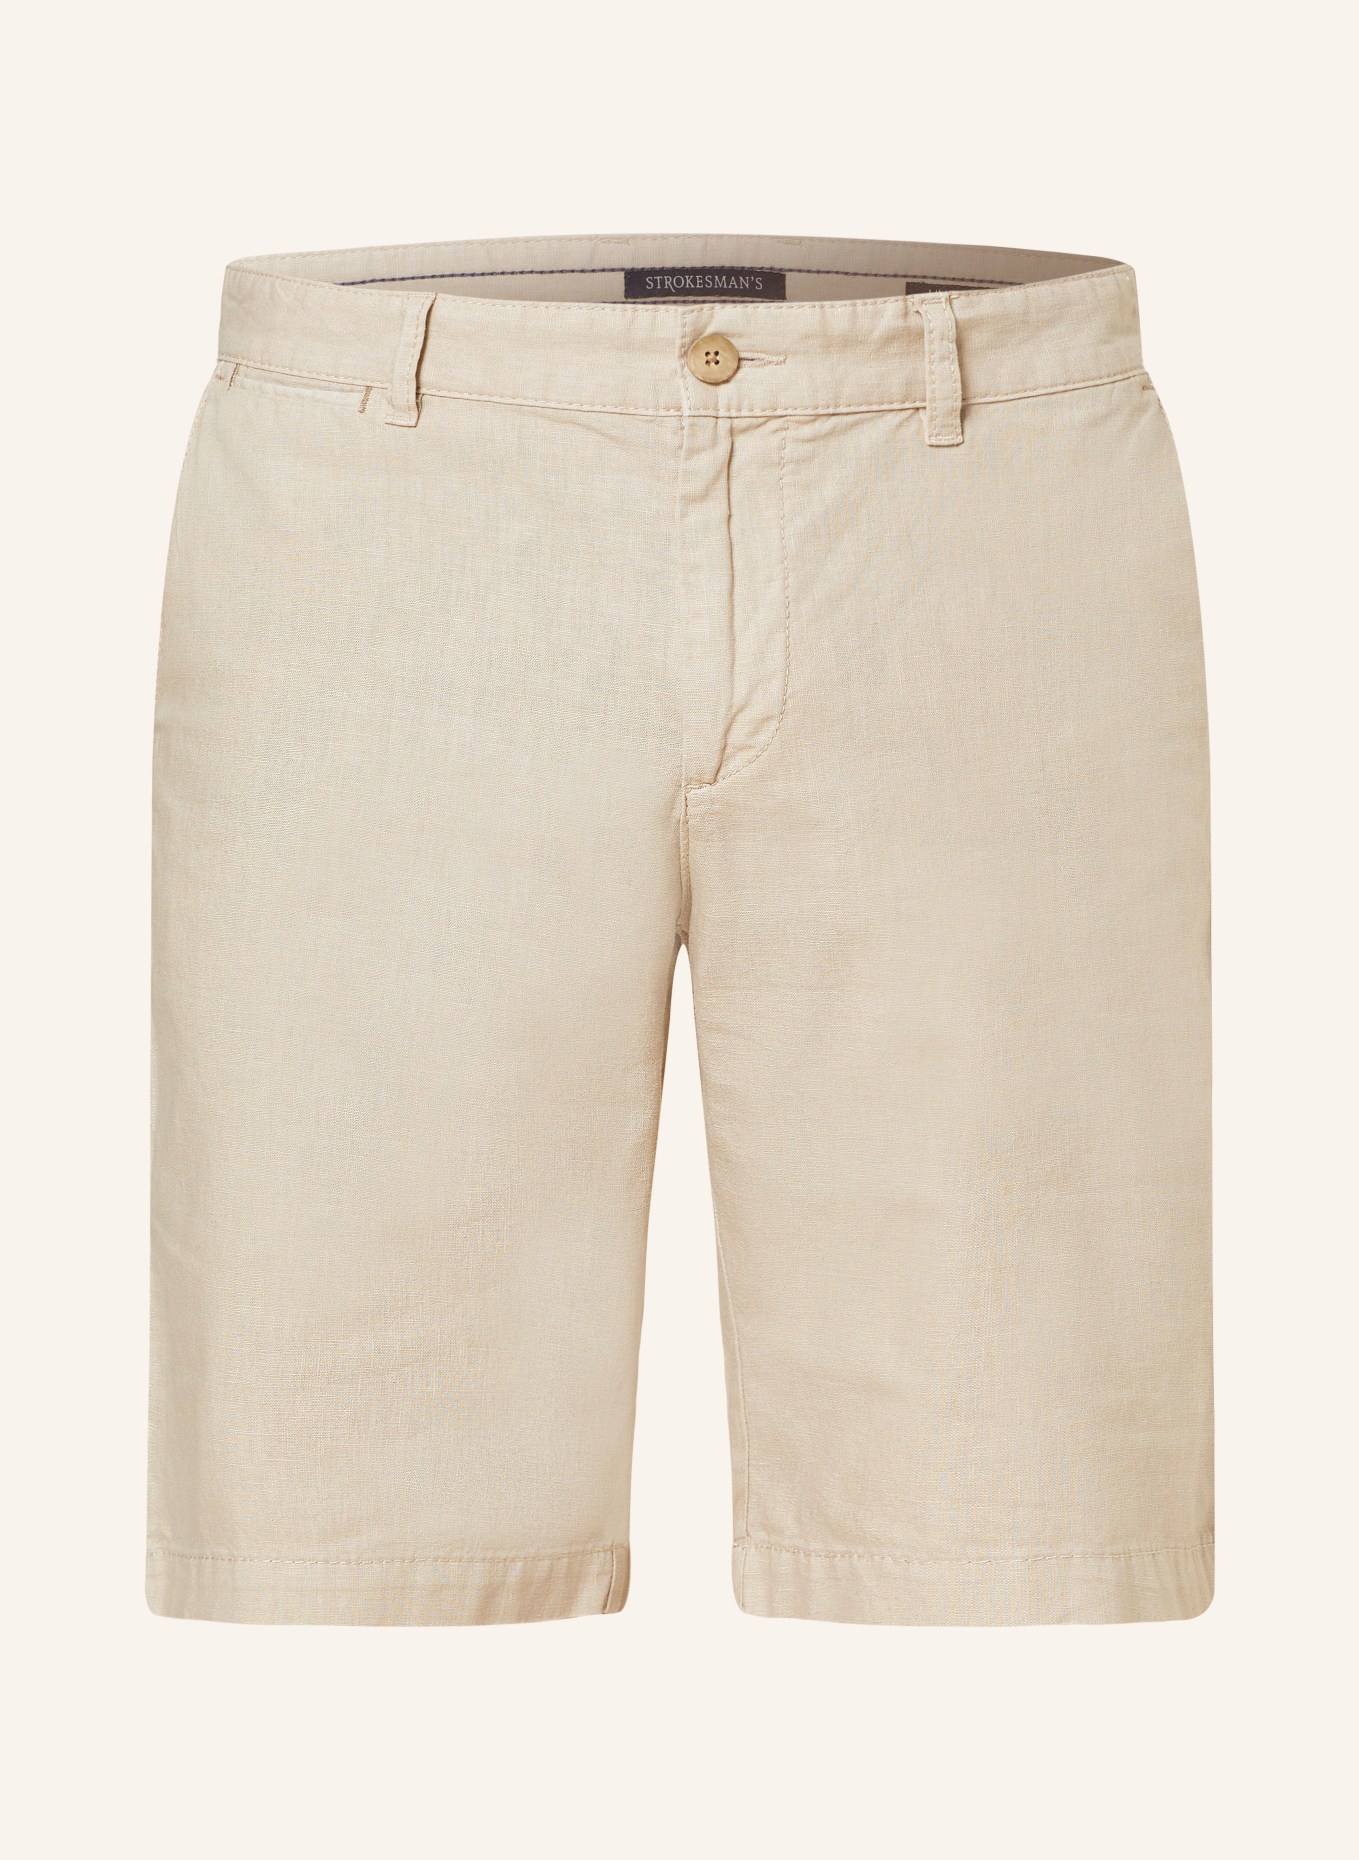 STROKESMAN'S Shorts slim fit with linen, Color: 0202 sand (Image 1)